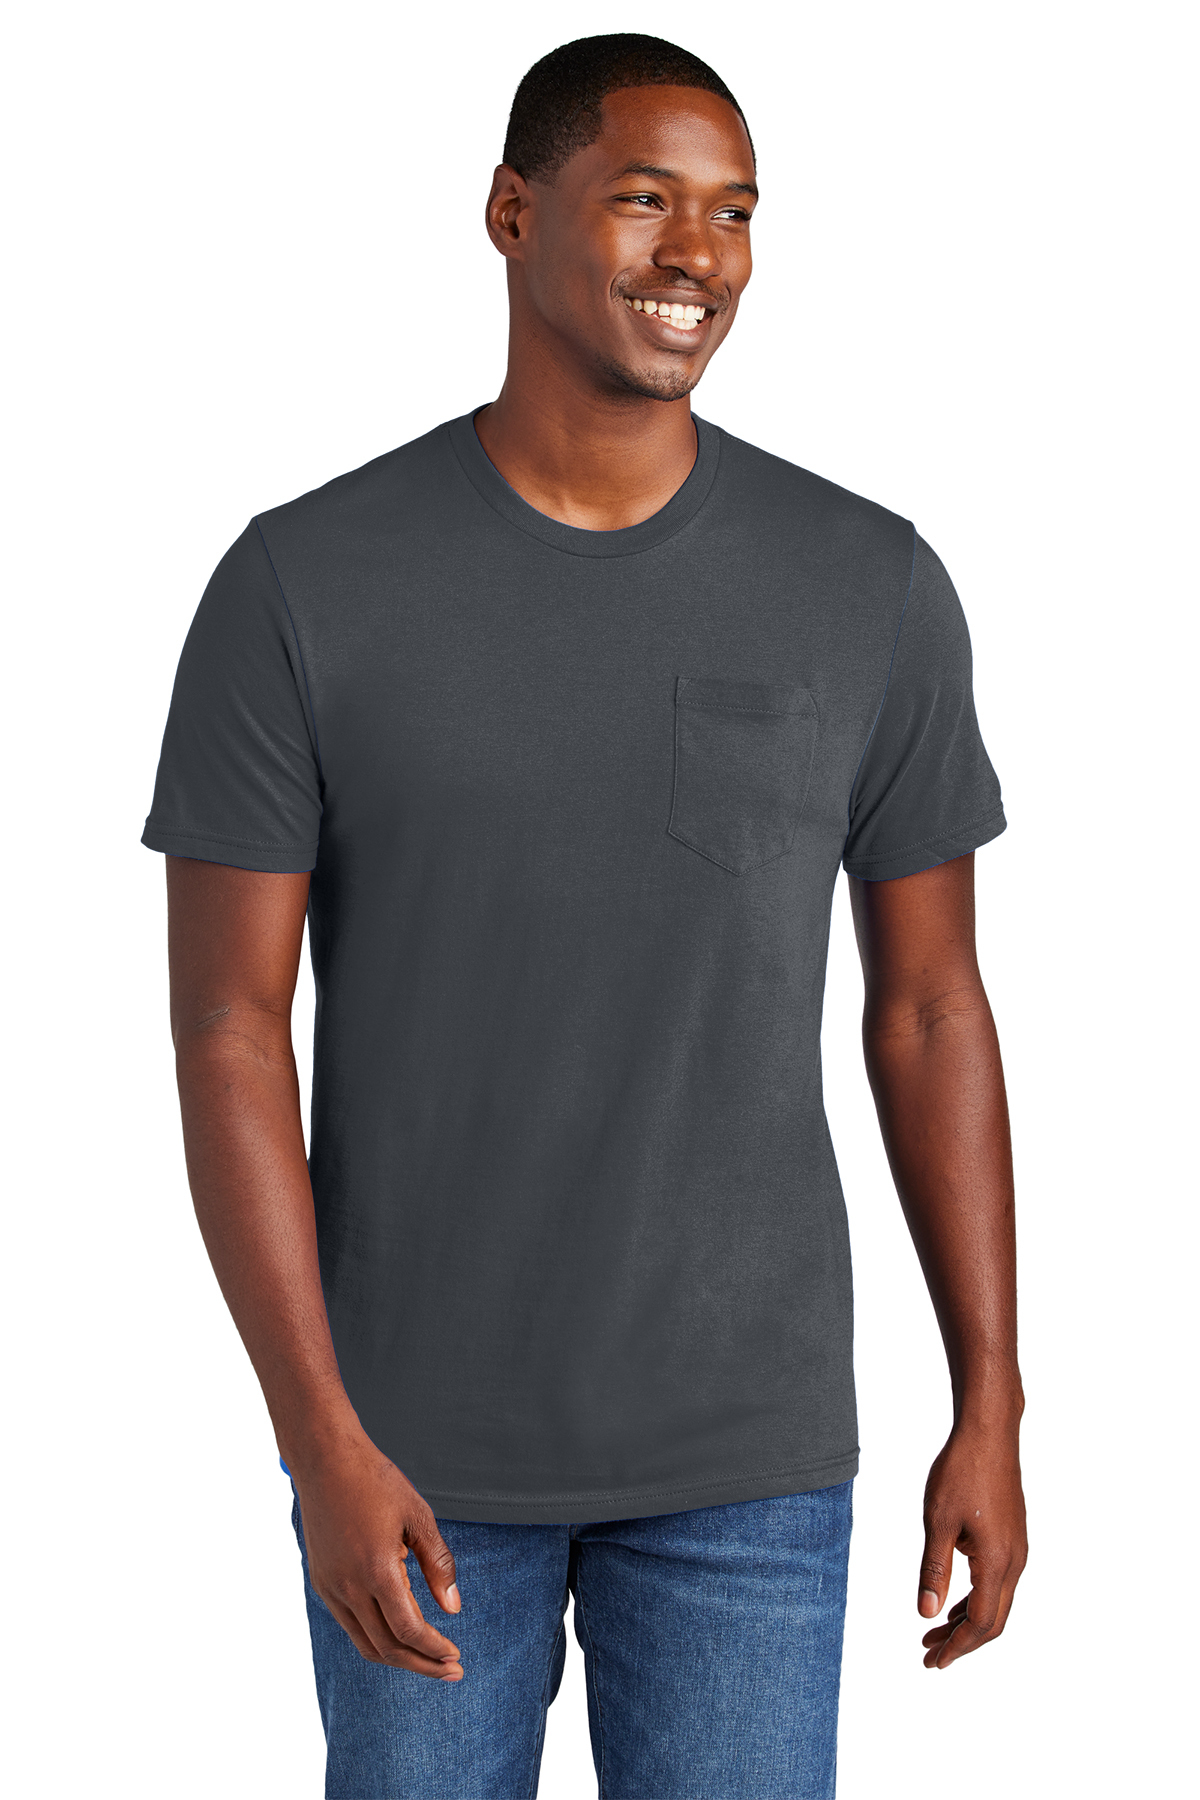 District Very Important Tee with Pocket | Product | SanMar